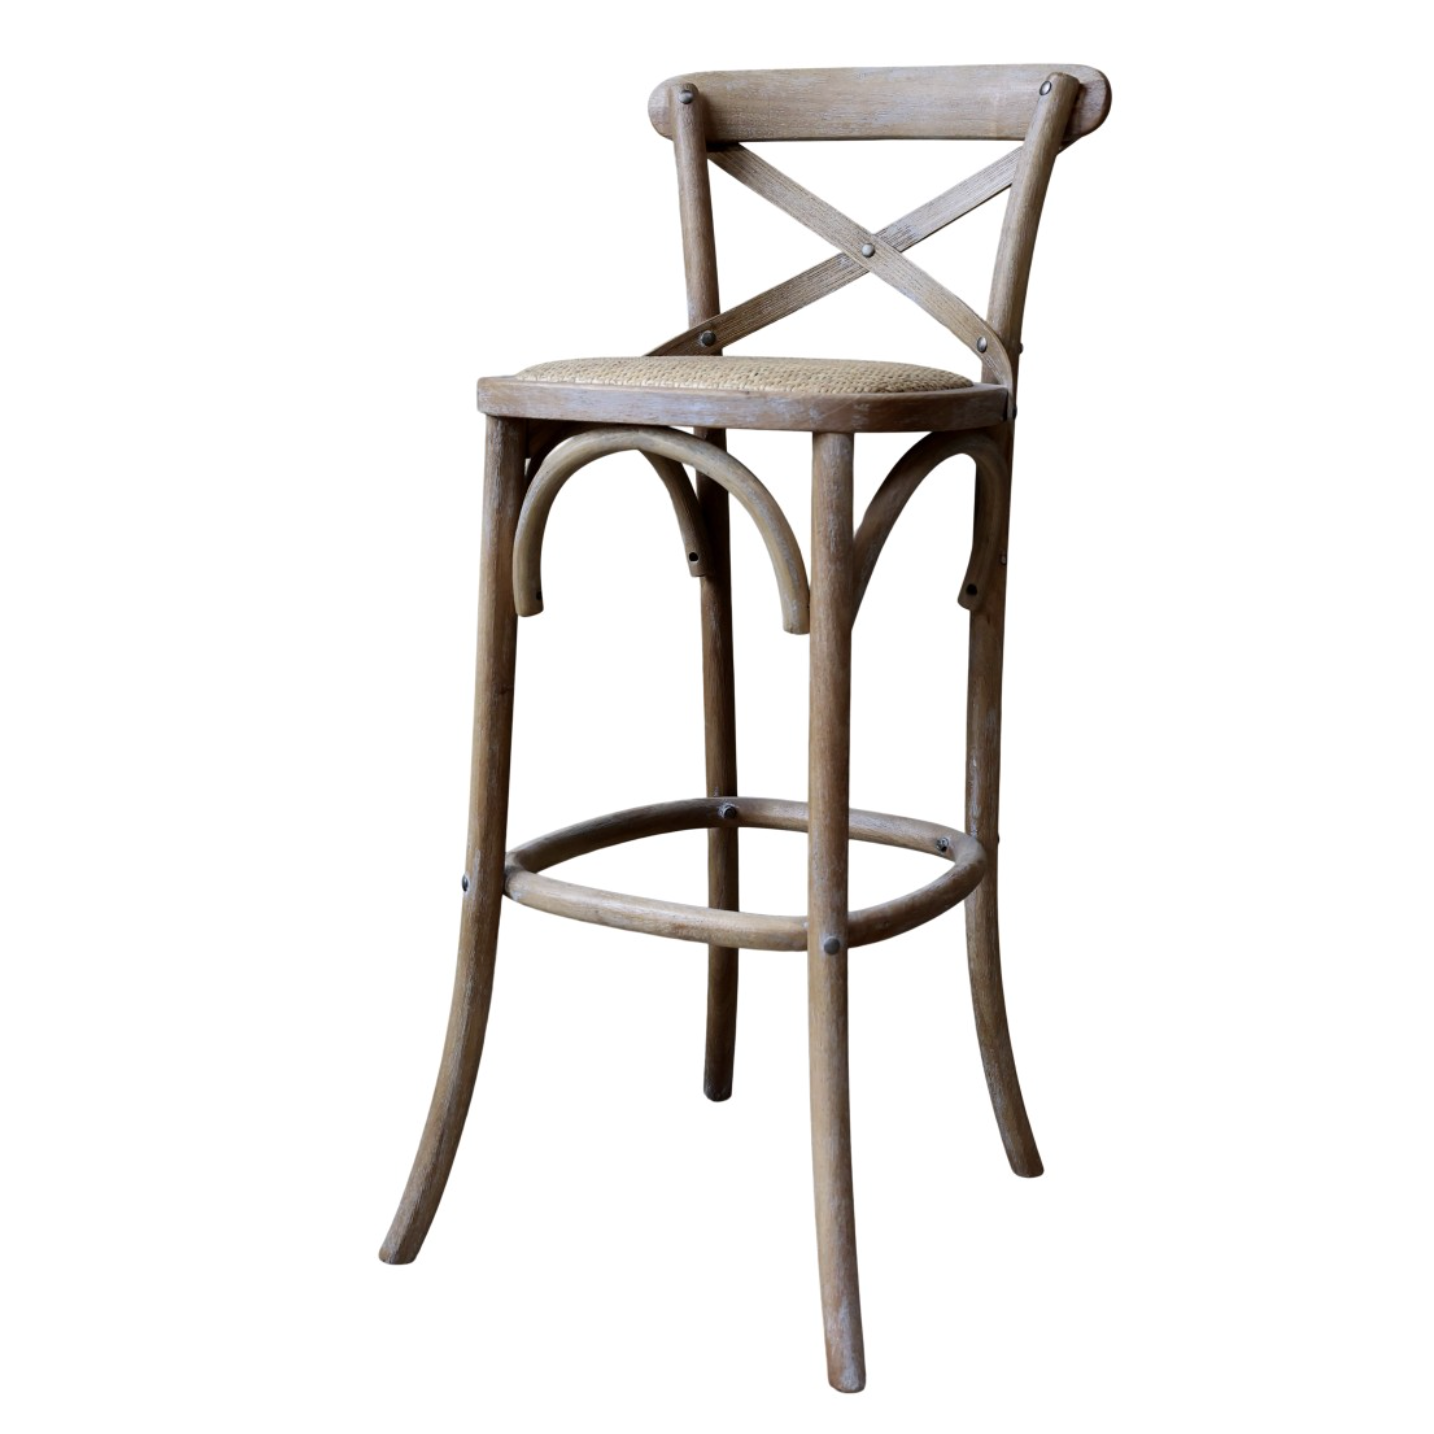 Wooden bar stool with wicker seat and white washed detail.